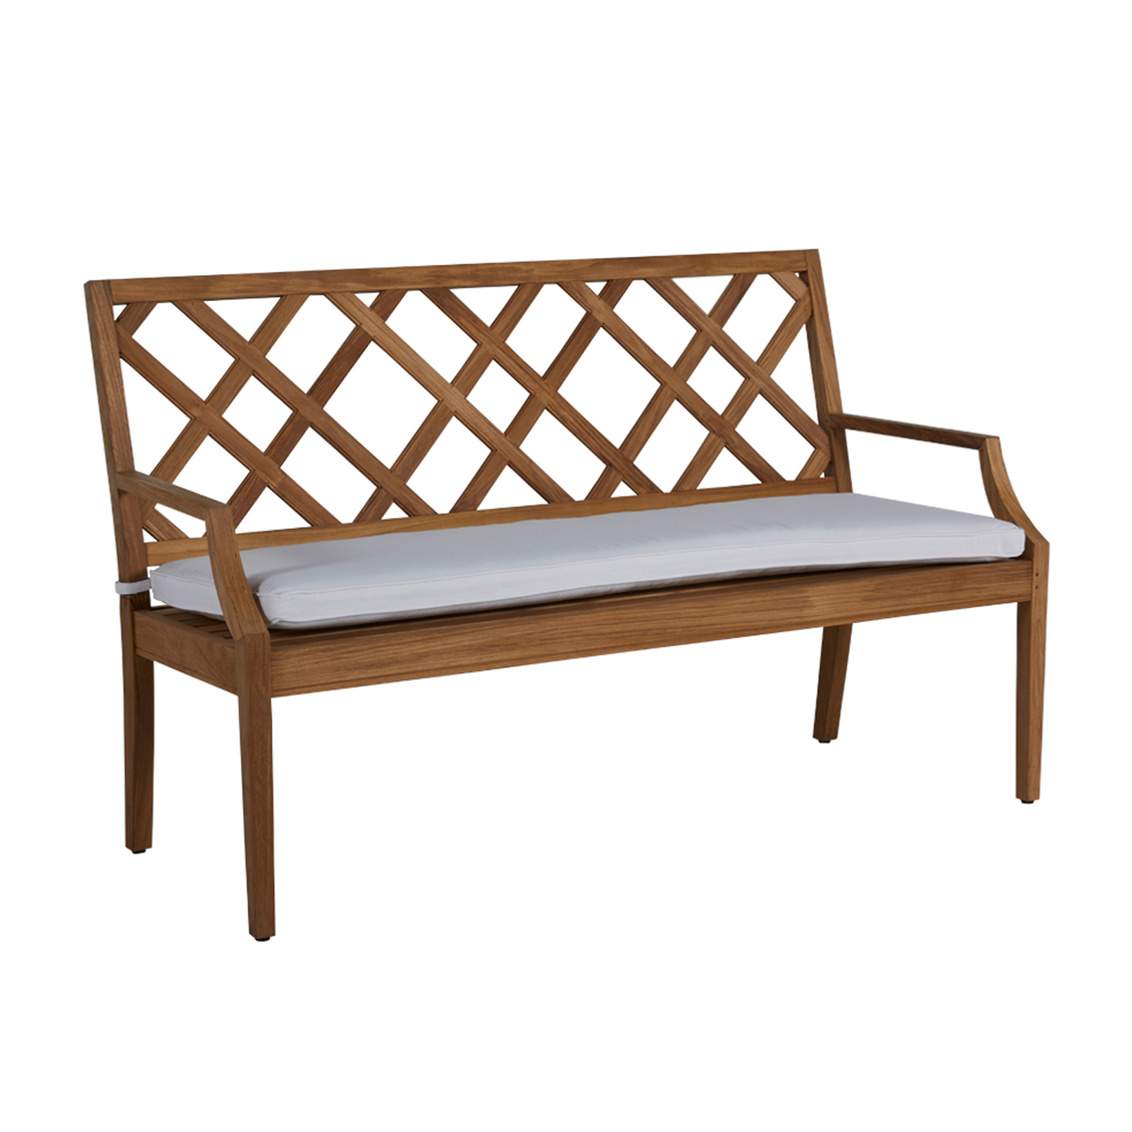 haley 60 inch bench in natural teak – frame only product image